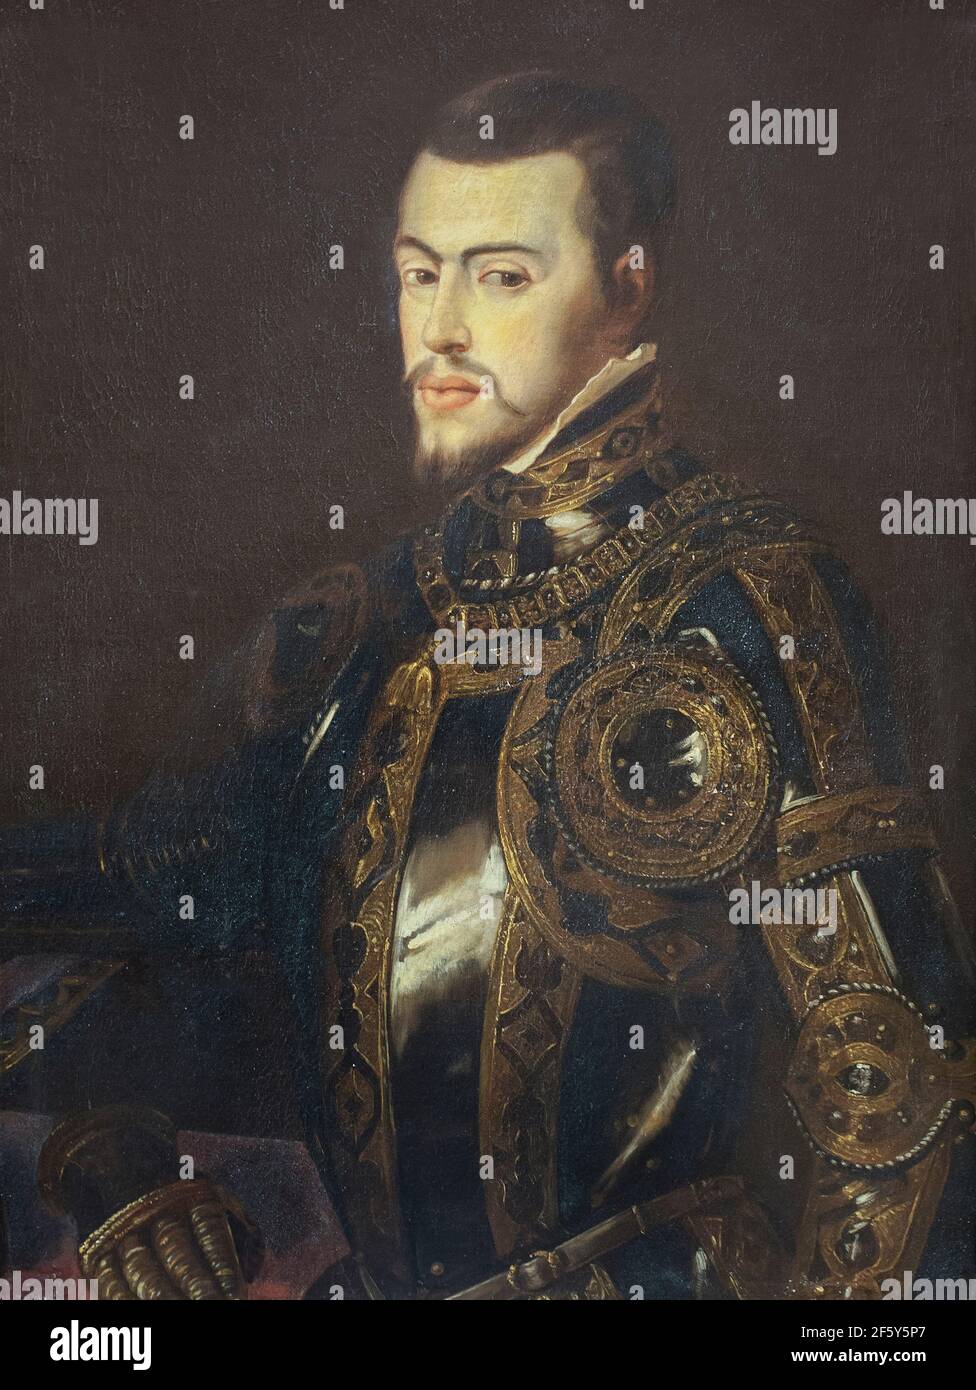 Three-quarter length portrait of Philip II, King of Spain. Painted by Titian in 1551. Museo Naval, Madrid Stock Photo